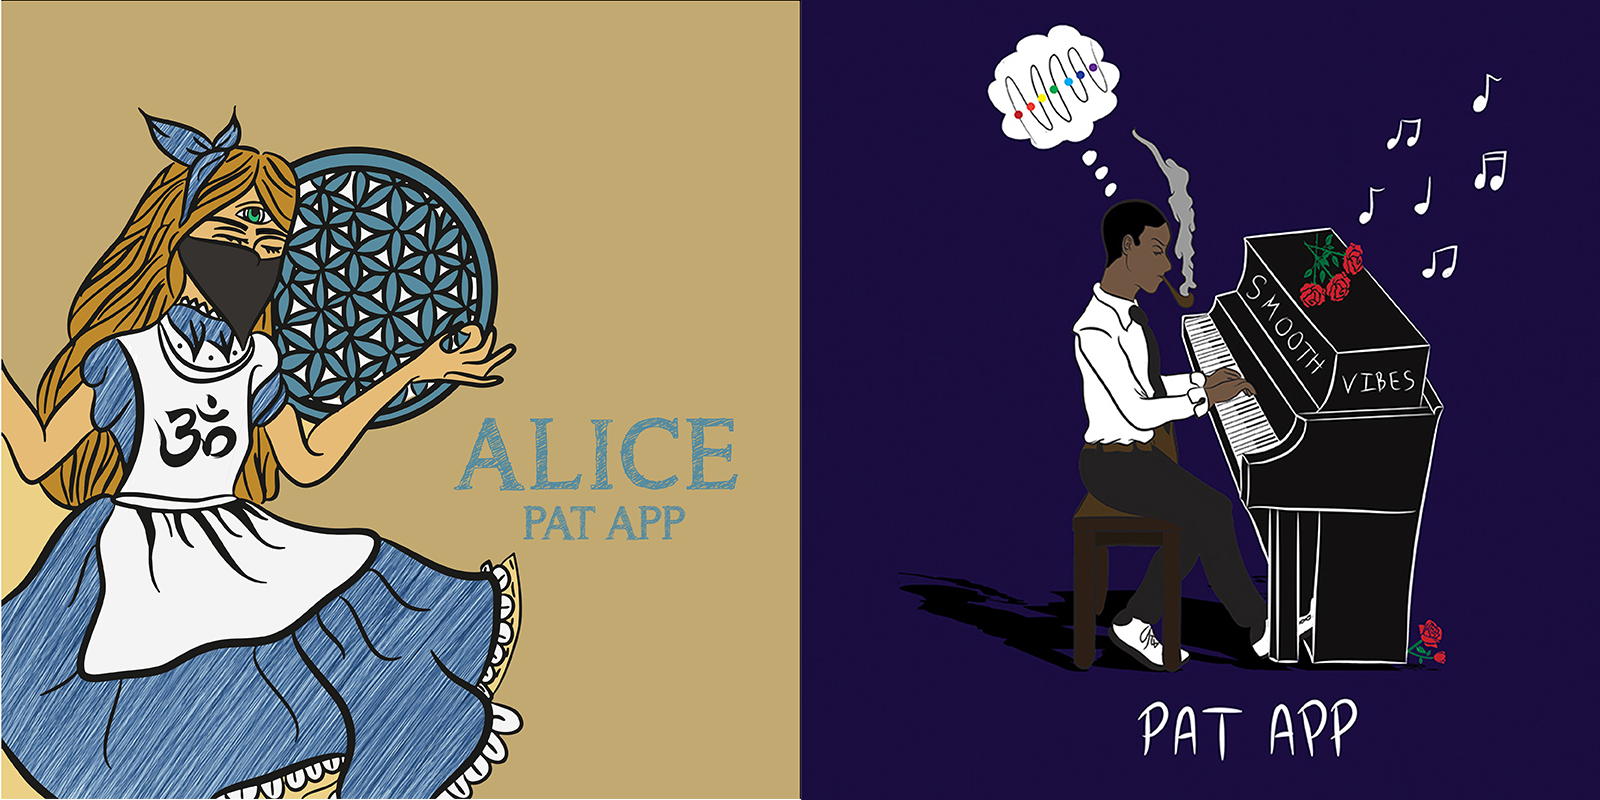 Pat App - "Smooth Vibes" & "Alice"